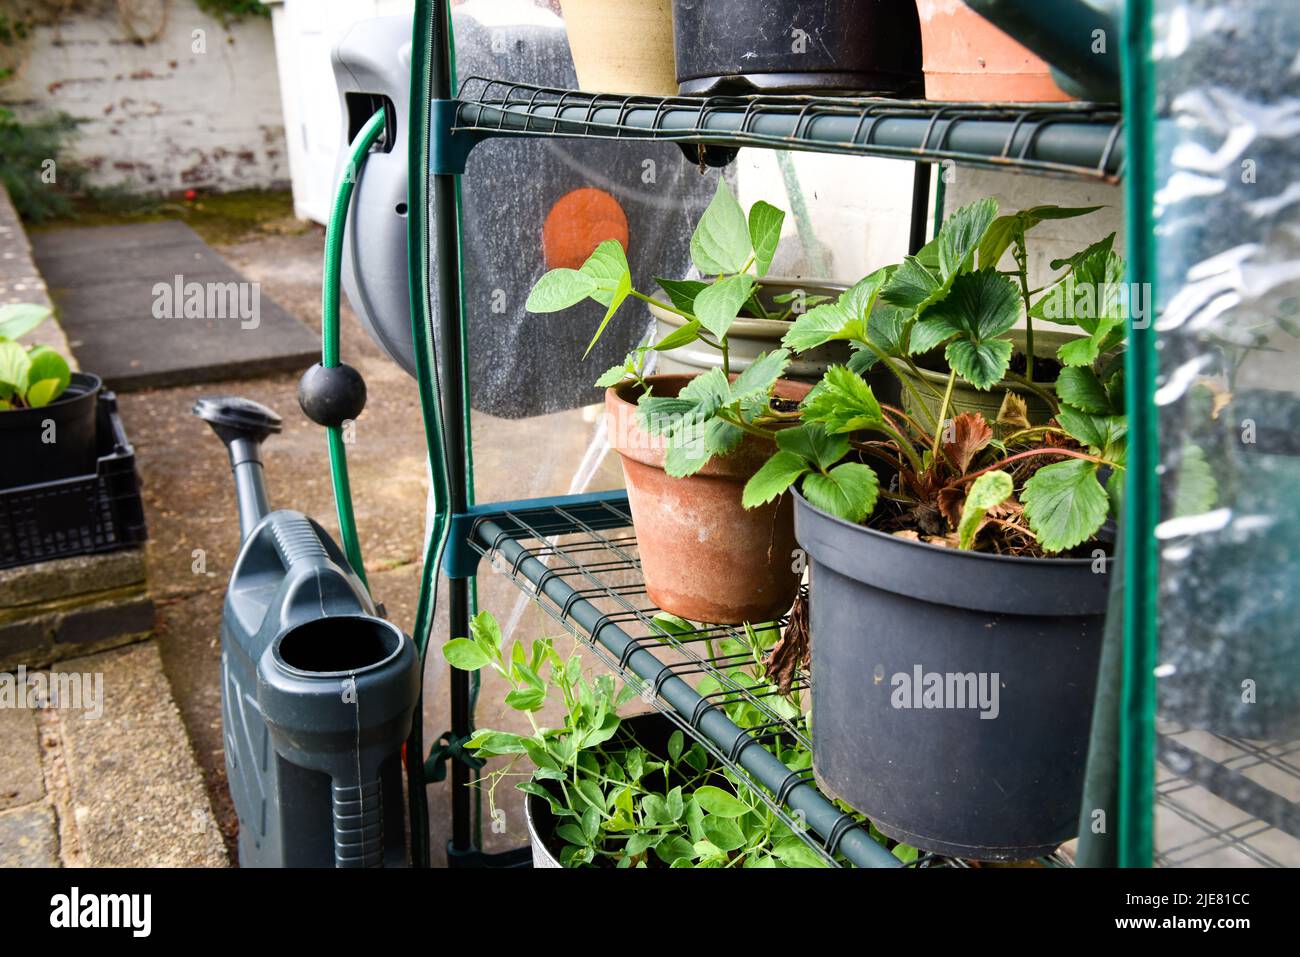 Small outdoor greenhouse for cultivating plants of fruit and veg grown at home Stock Photo